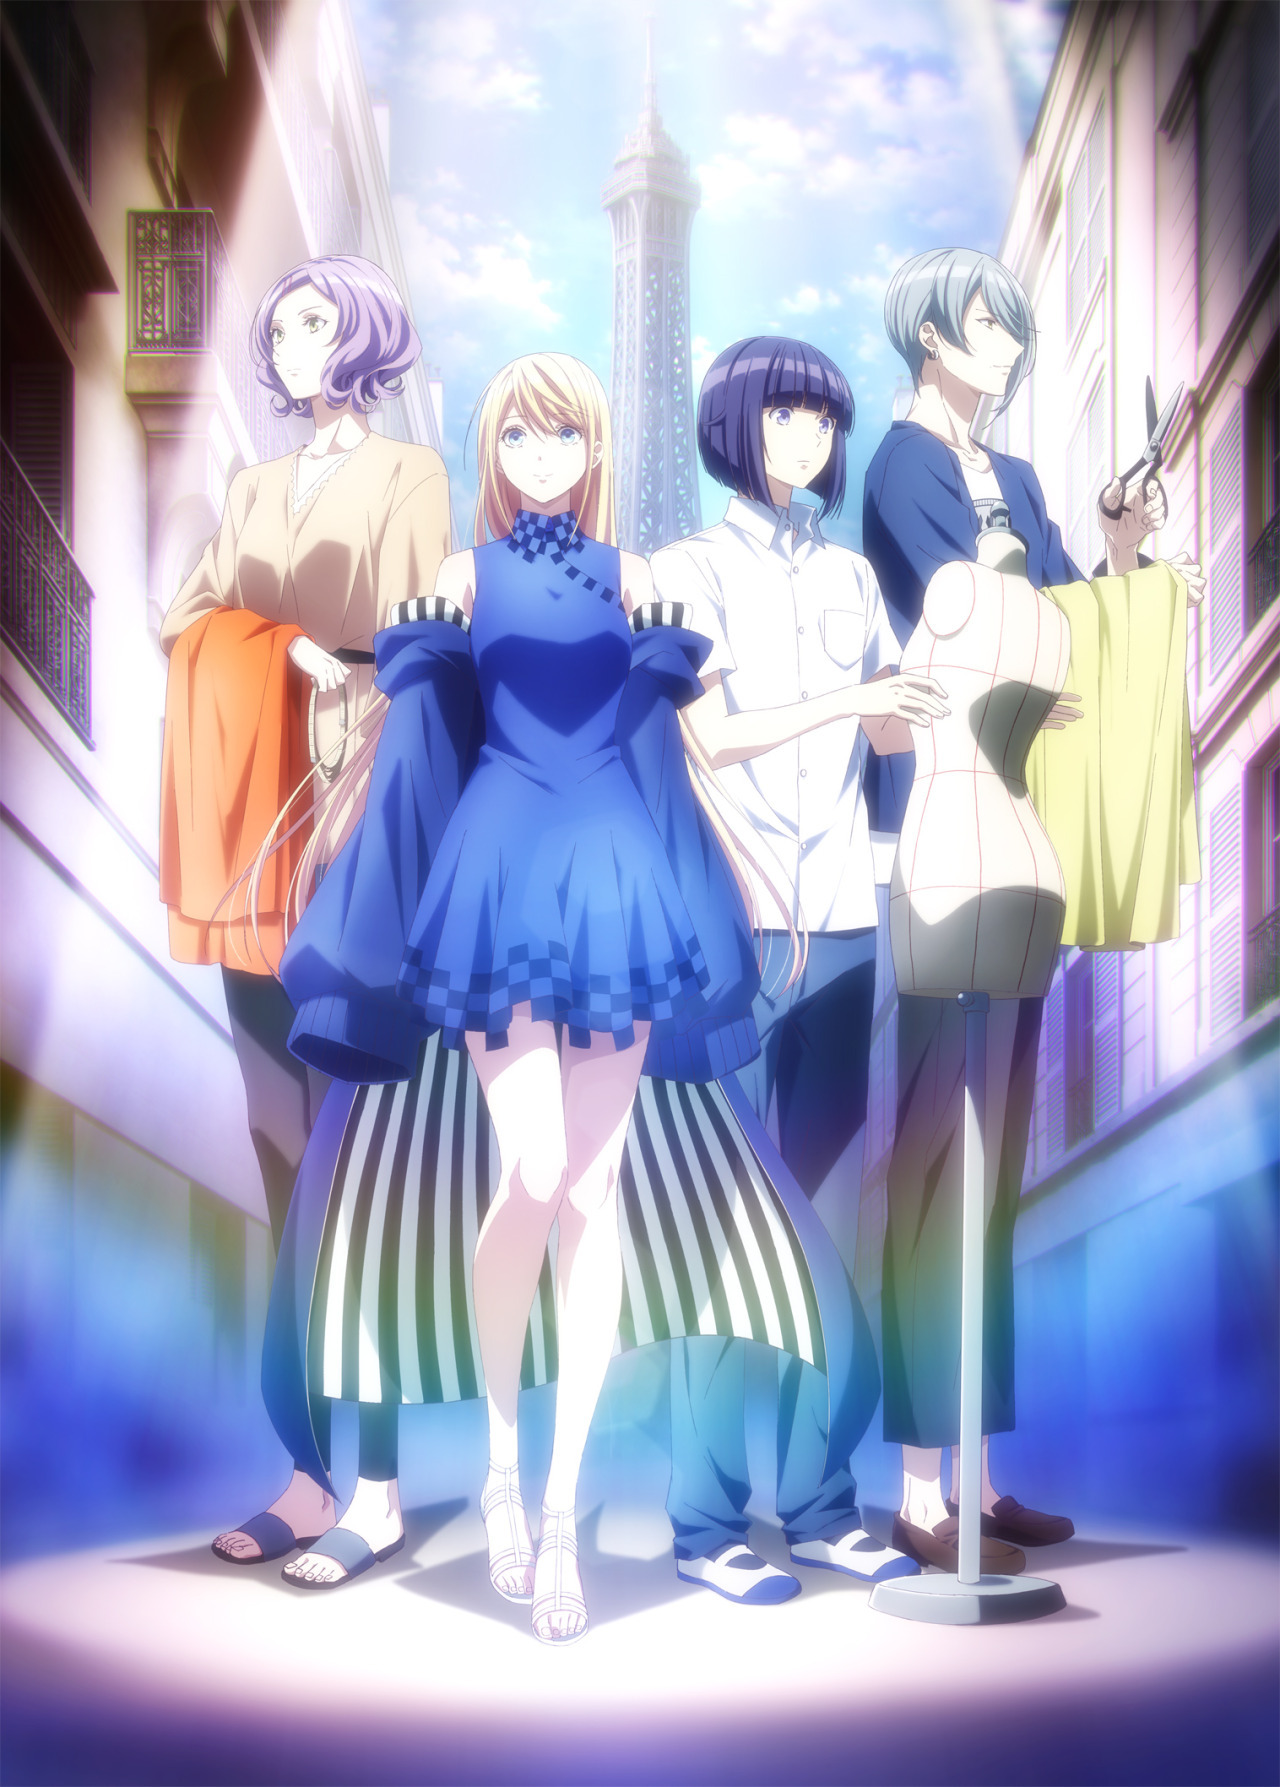 The “Runway de Waratte” (Smile at the Runway) TV anime will consist of 12 episodes. It is scheduled to begin January 10th on MBS’s Animeism programming block.
-Synopsis-““Runway de Waratte starts with the story of Fujito Chiyuki, an aspiring fashion...